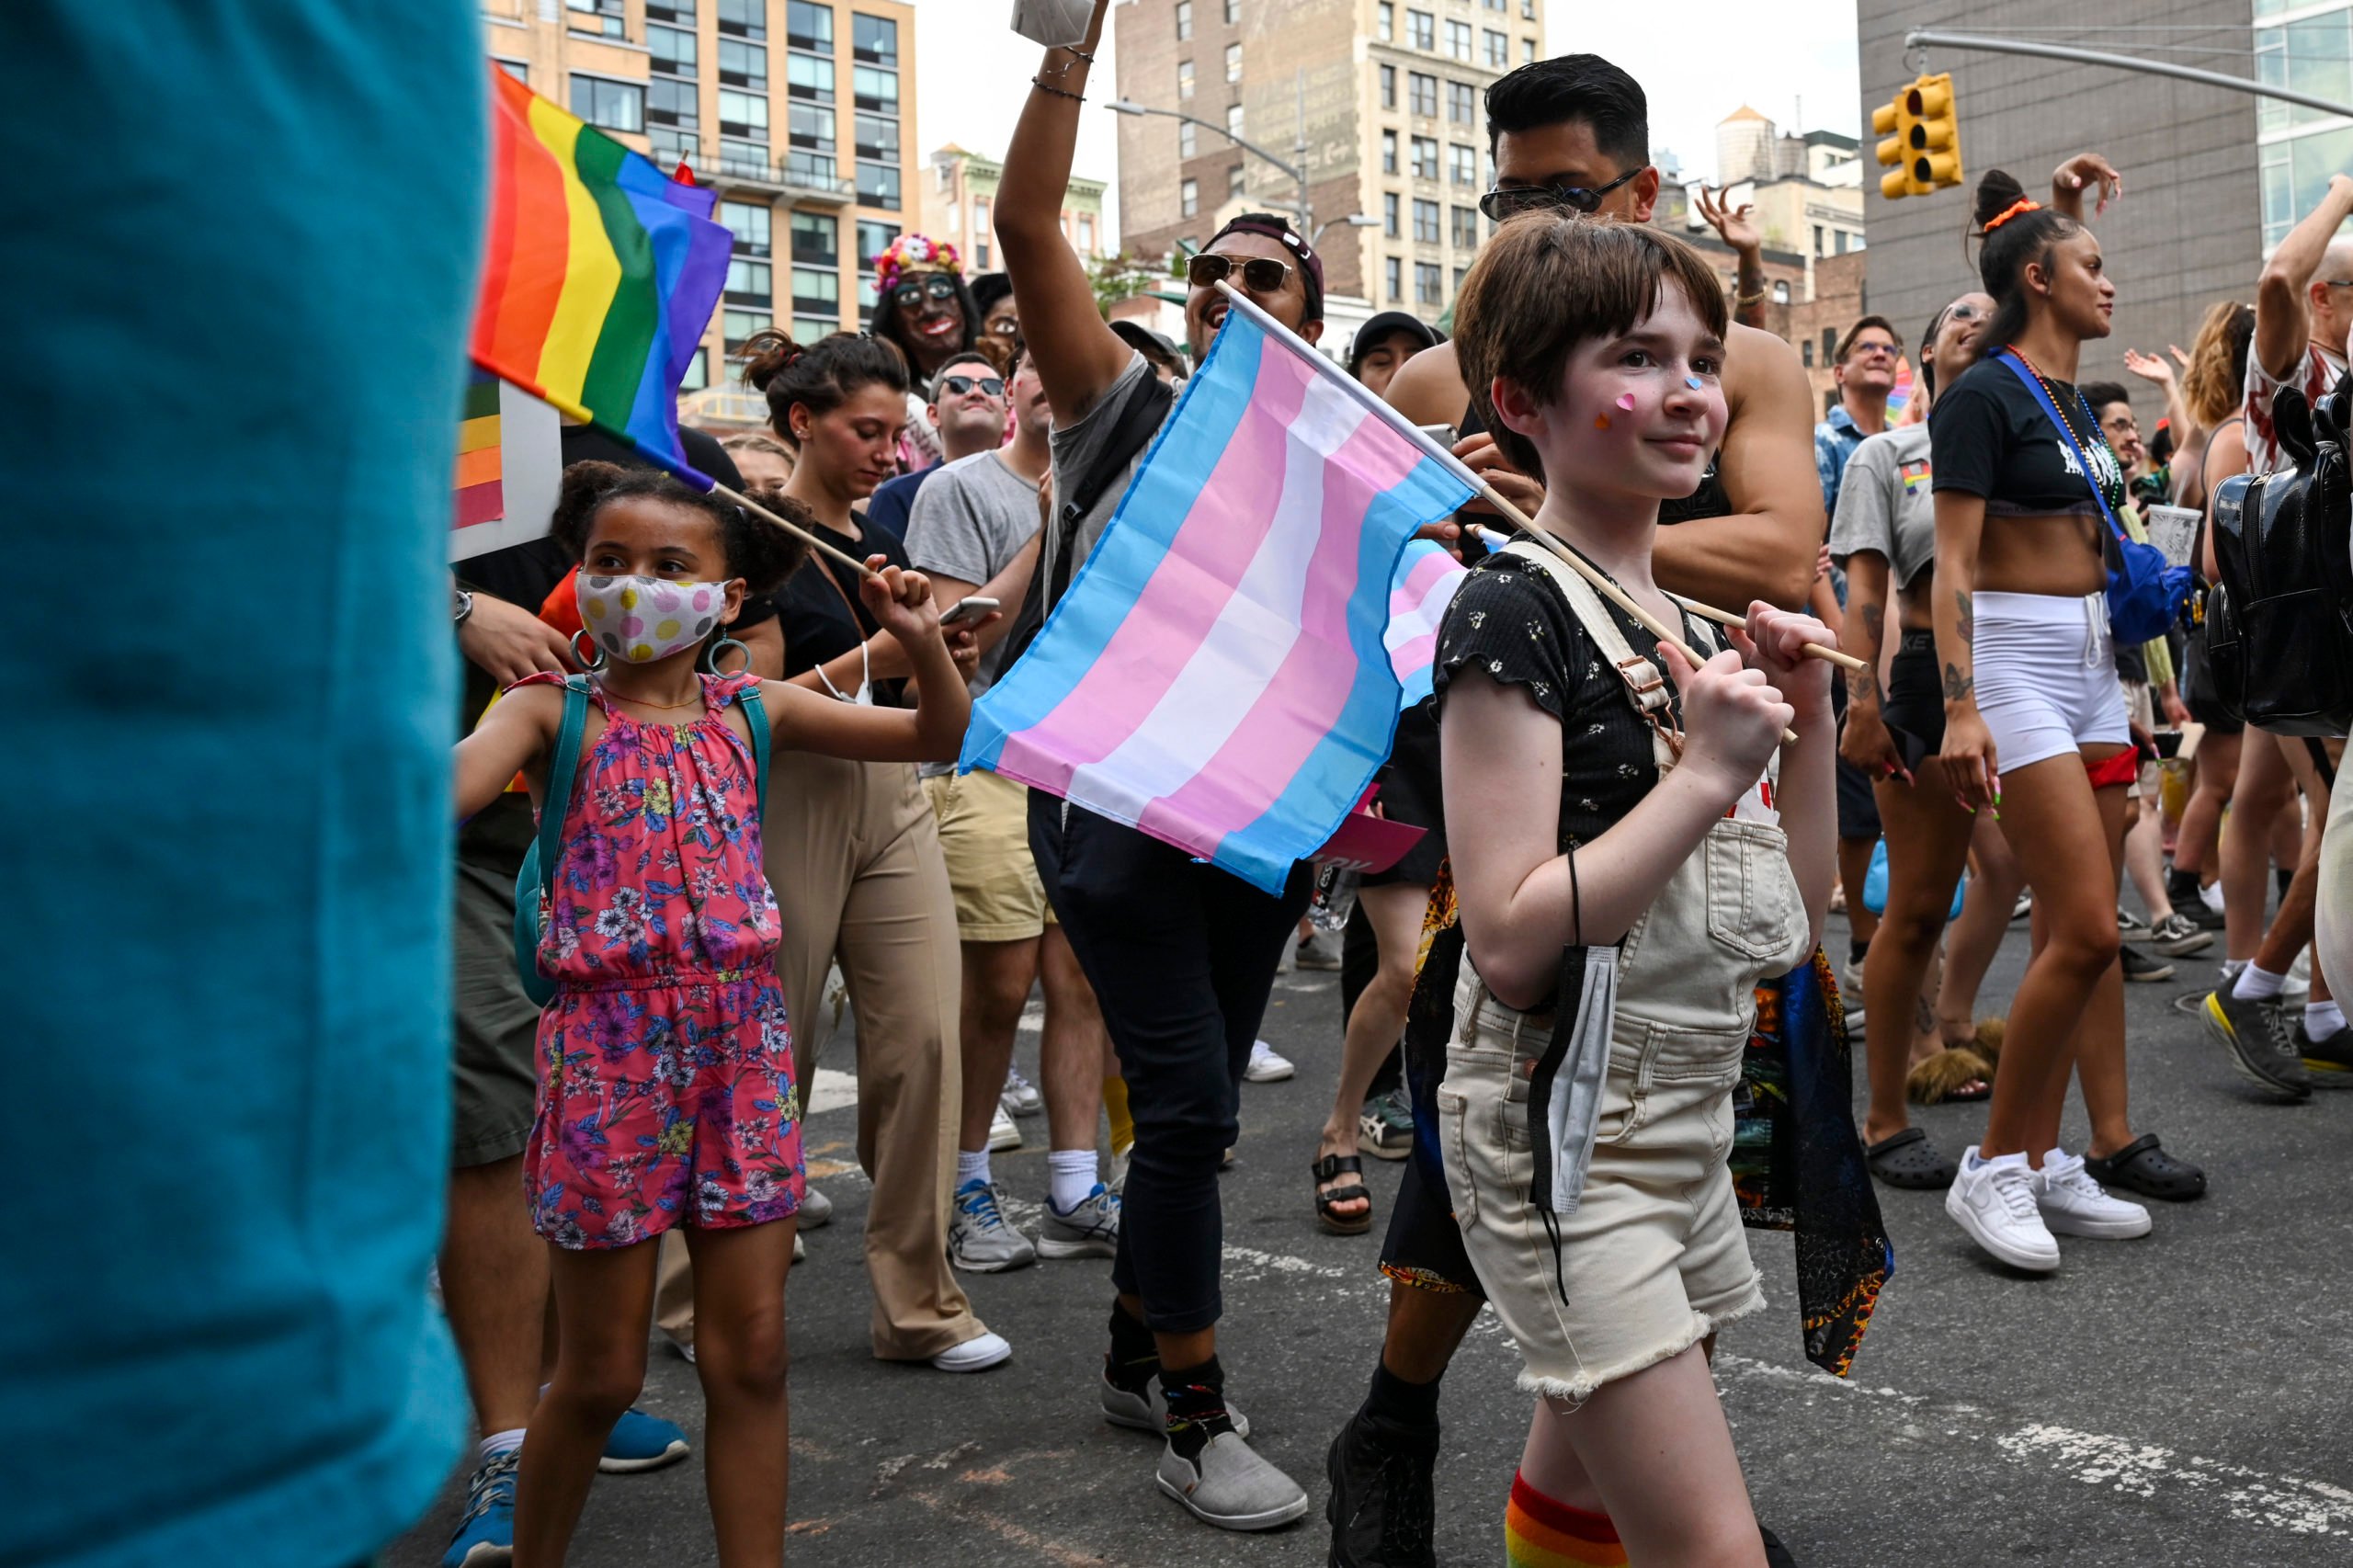 NEW YORK, NEW YORK - JUNE 27: A child carrying Trans pride flags marches in the 3rd Annual Queer Liberation March on June 27, 2021 in New York City. The Queer Liberation March is a “people’s march” working to "reclaim the spirit and meaning of Pride” with a motto of "No Corps - No Cops - No BS" according to their website. This year’s march started in Bryant Park and wended near The Stonewall Inn in the West Village. (Photo by Alexi Rosenfeld/Getty Images)